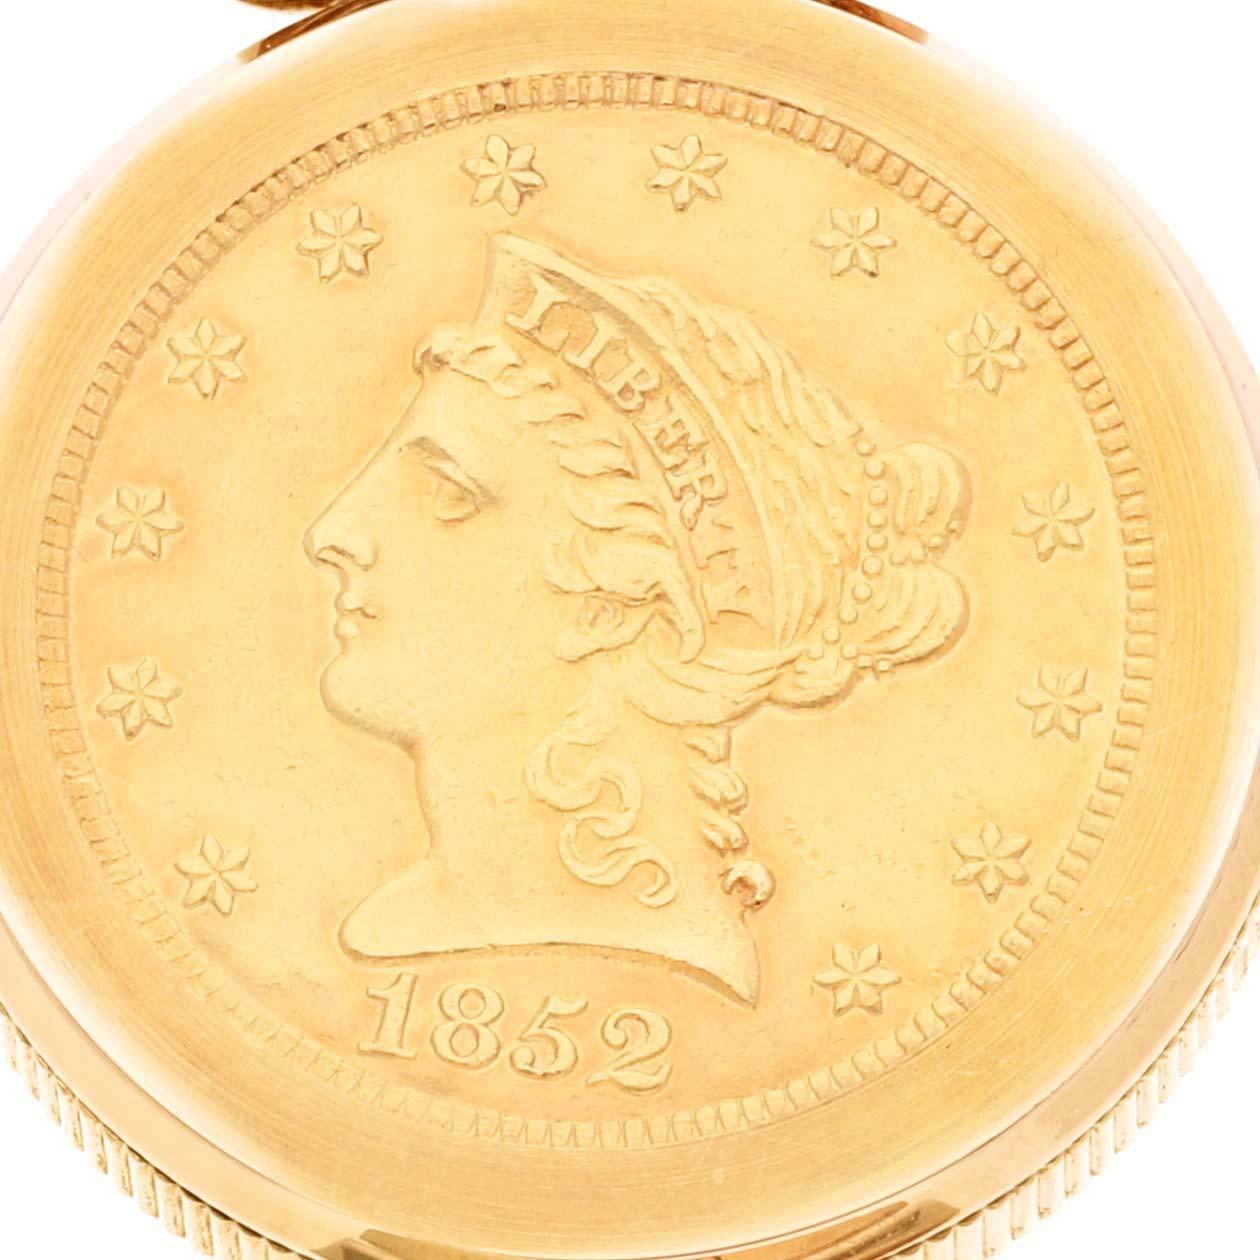 Corum 2.5 Dollars Eagle Liberty Coin Yellow Gold Ladies Watch 1852. Quartz. 18k yellow gold case with an 18k yellow gold coin 21 mm in diameter. Coin edge. Circular grained crown set with an original Corum factory diamond. . Mineral glass crystal.